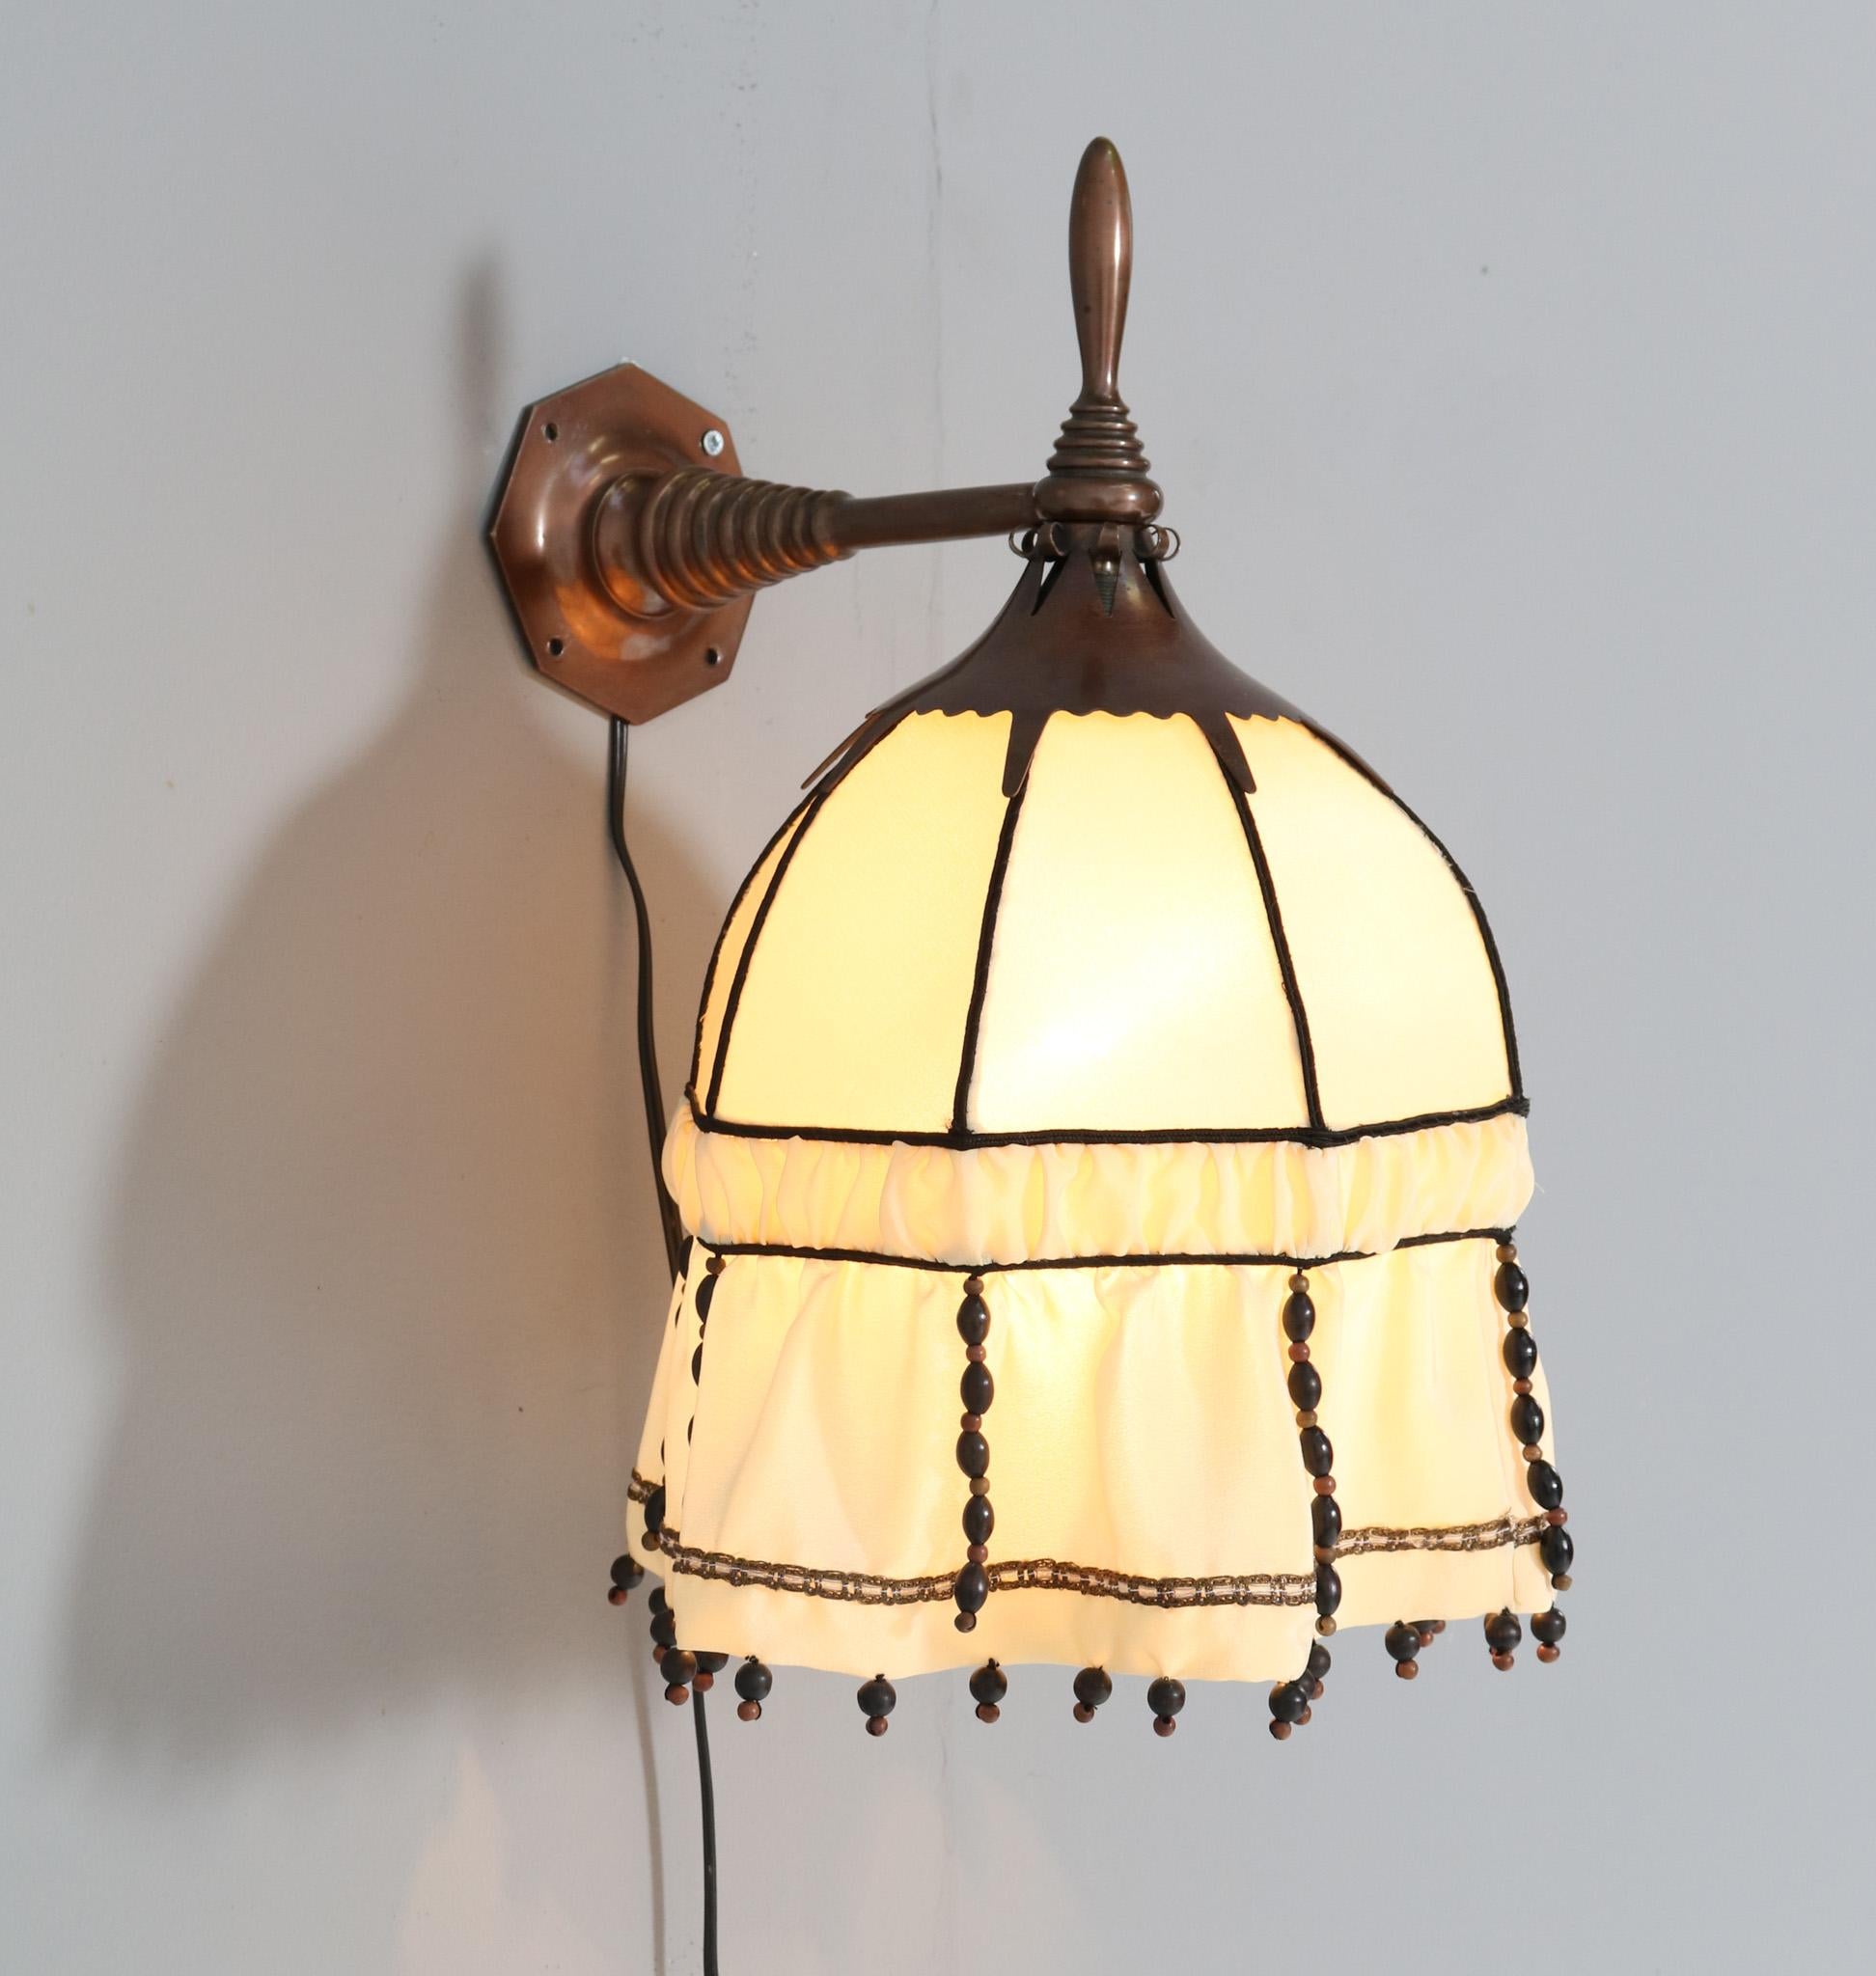 Early 20th Century Patinated Copper Art Deco Amsterdamse School Wall Light by Willem Kromhout For Sale